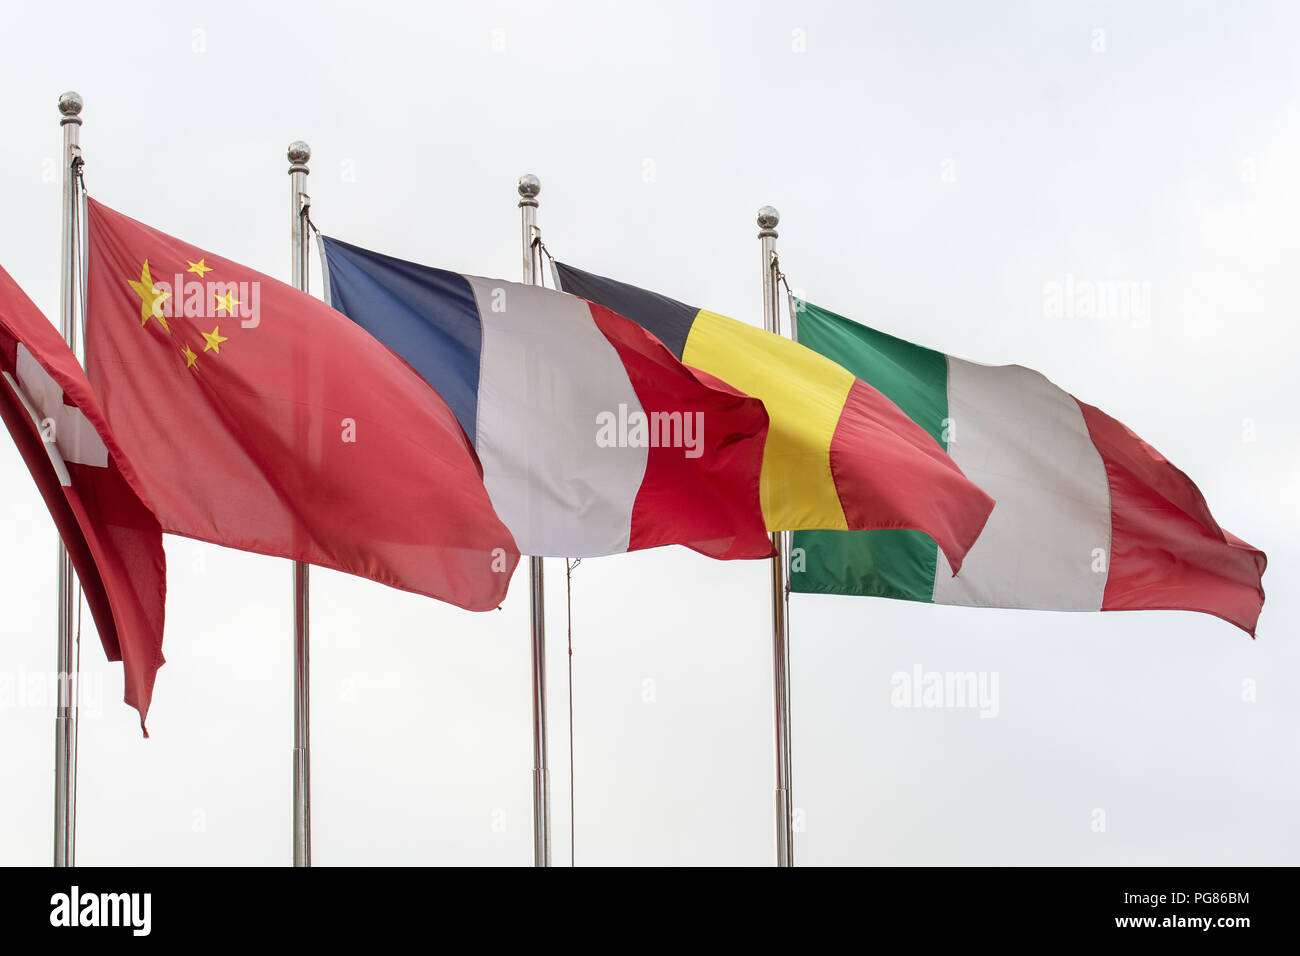 Flags of Italy, Germany, France, China and Switzerland flying from poles Stock Photo